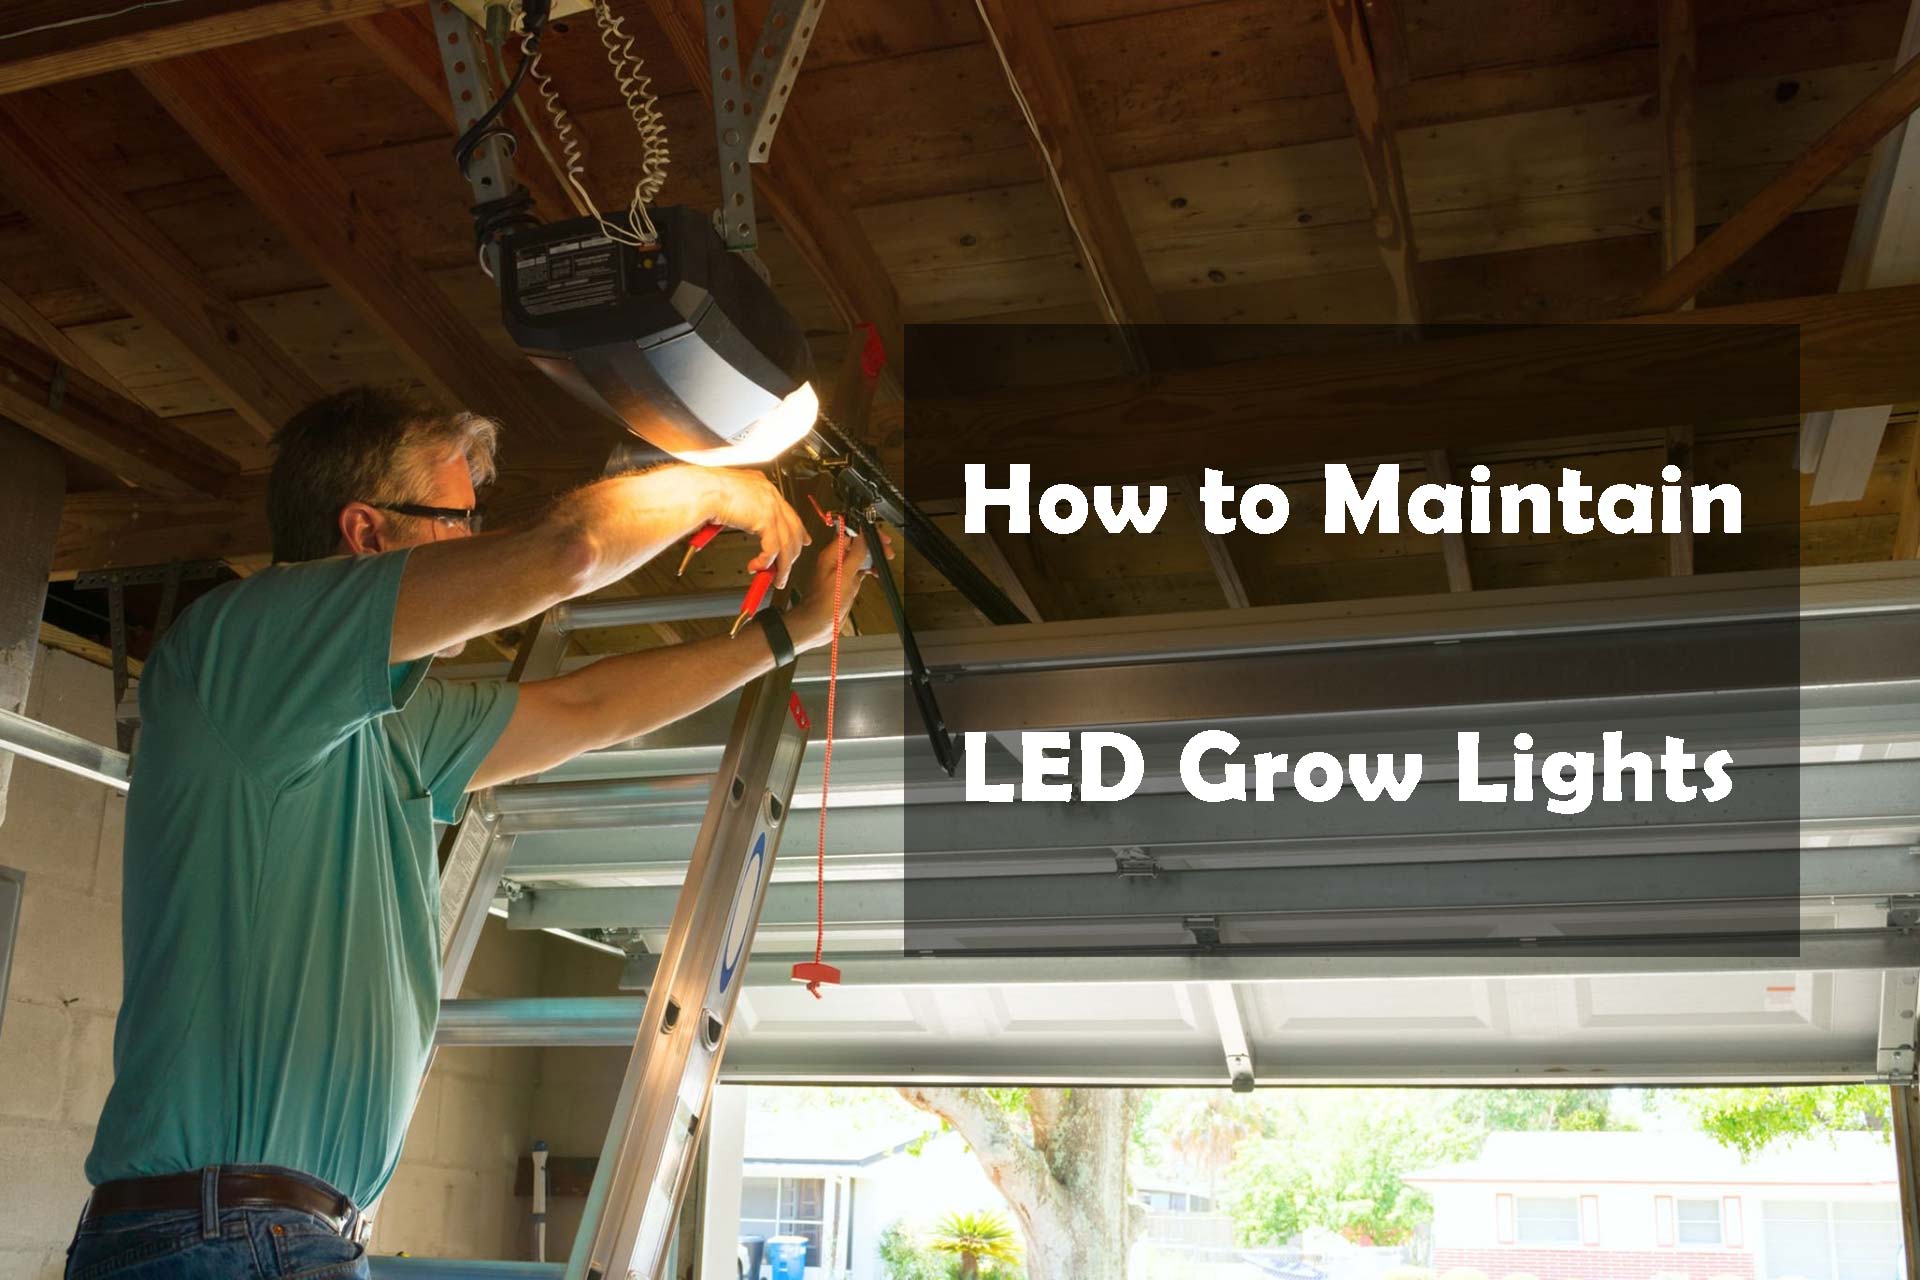 How To Maintain LED Grow Lights